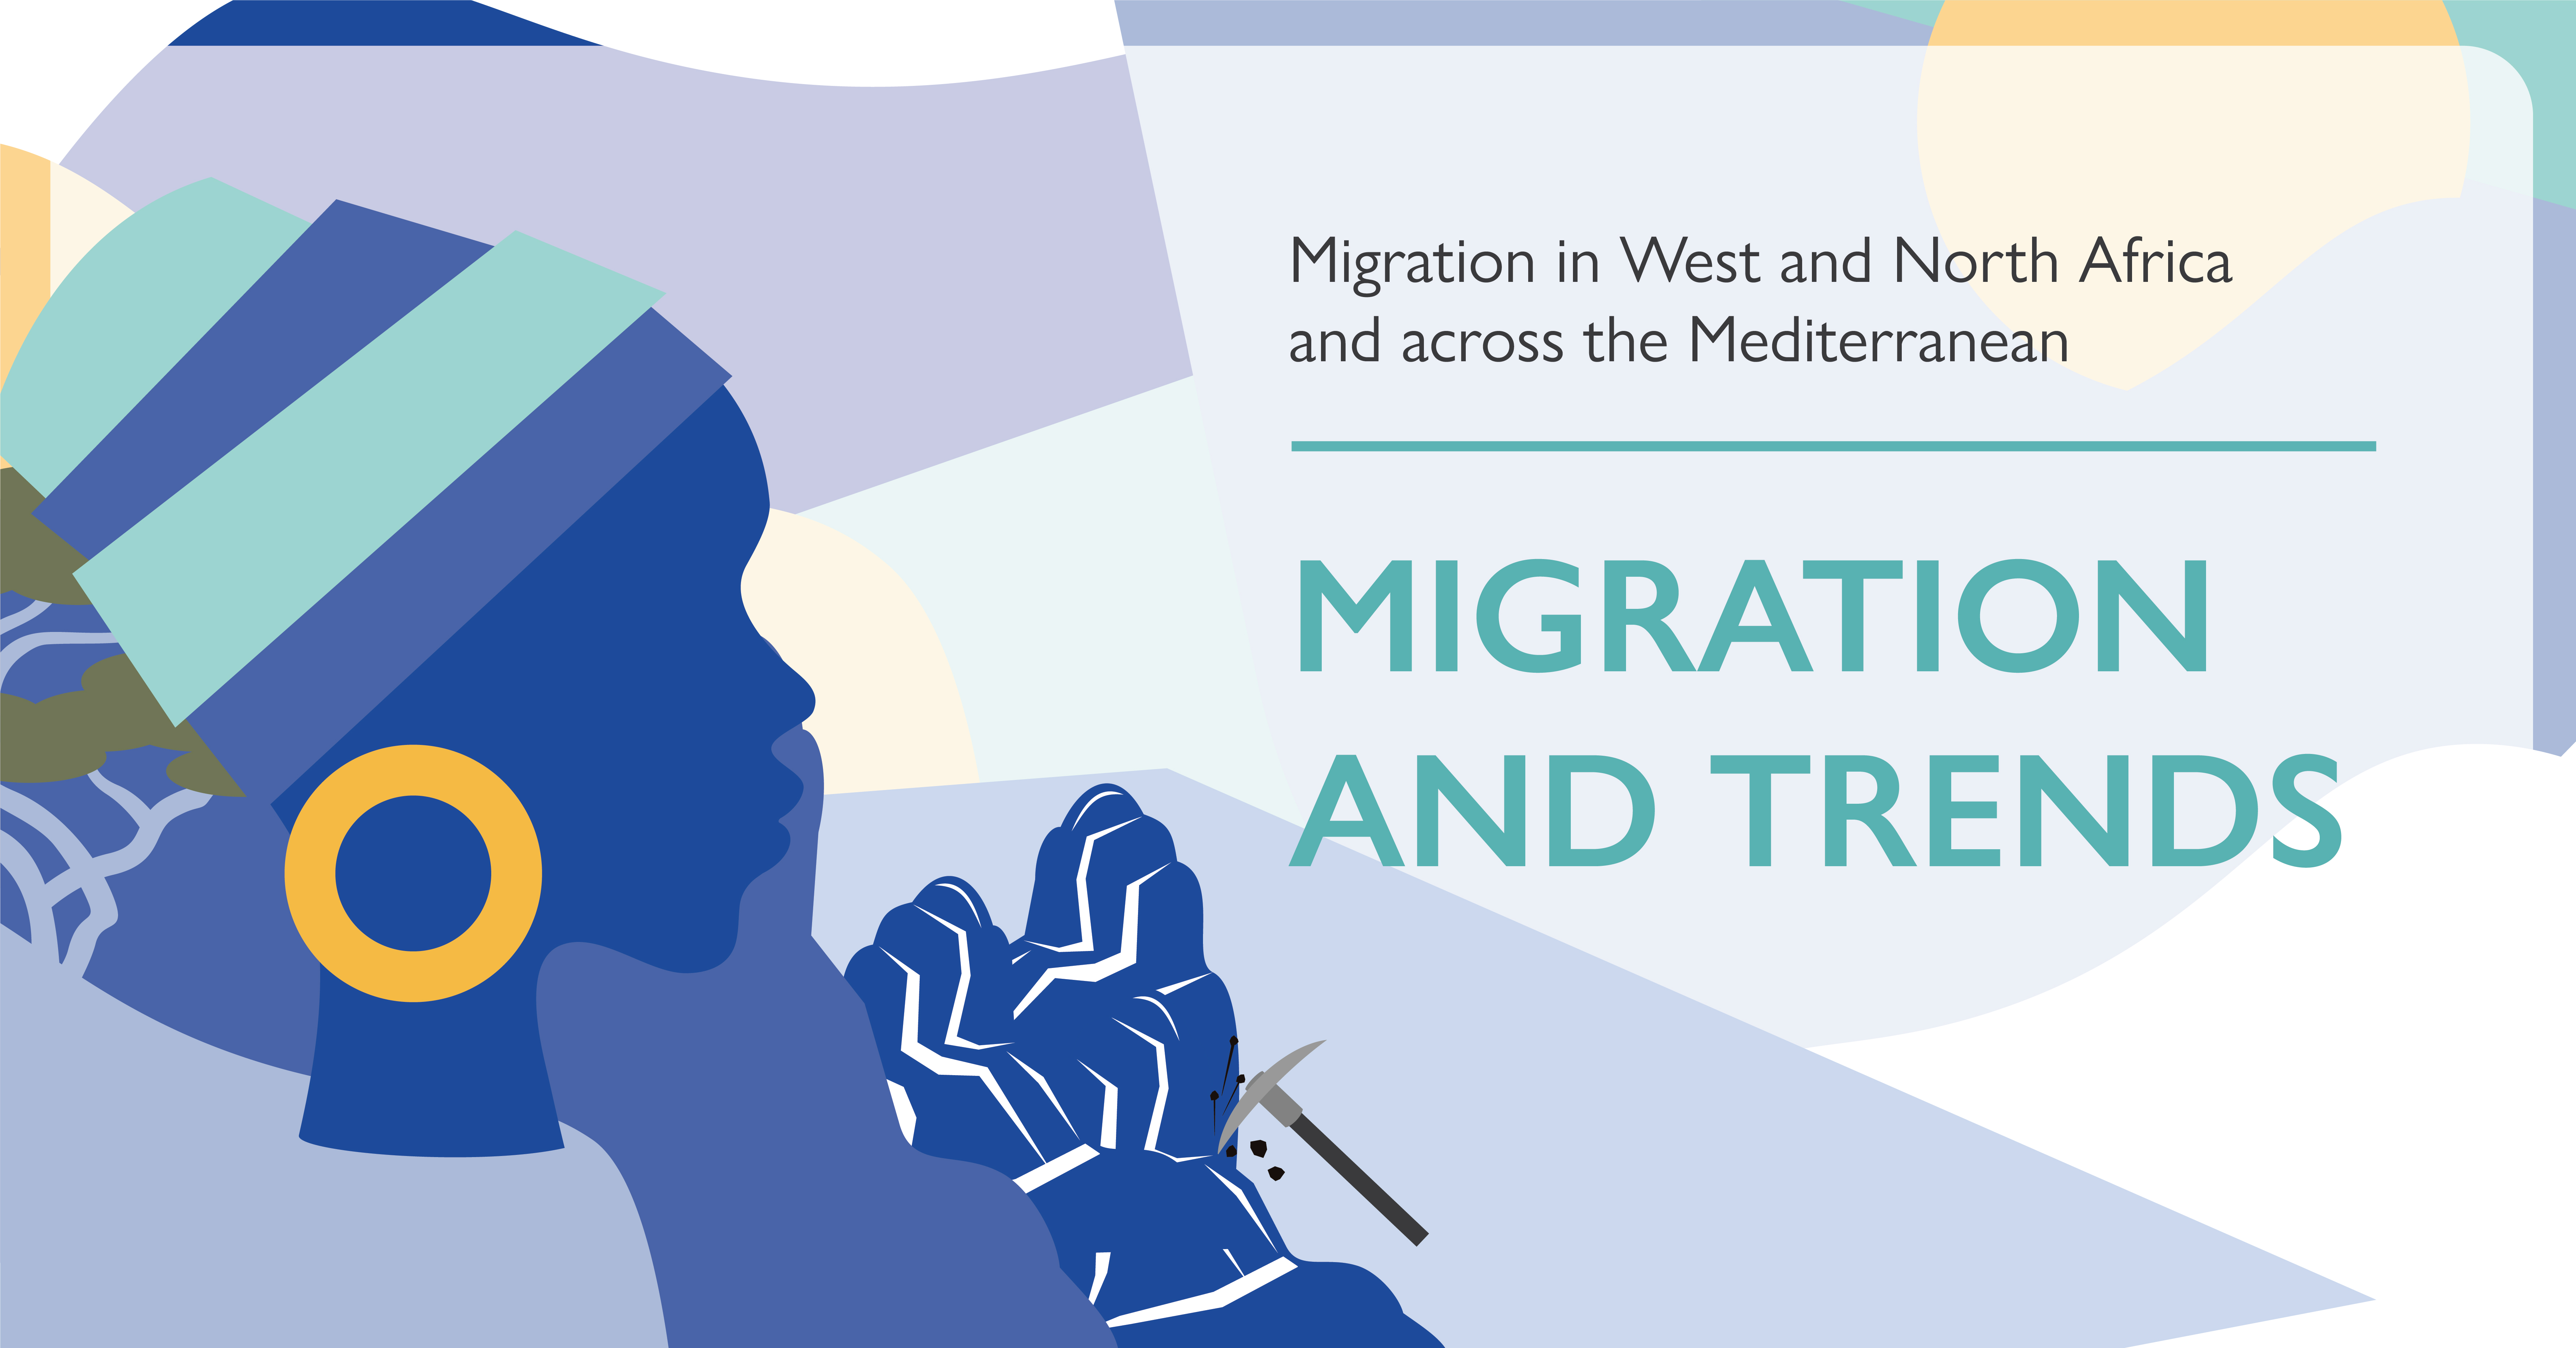 MIGRATION AND TRENDS